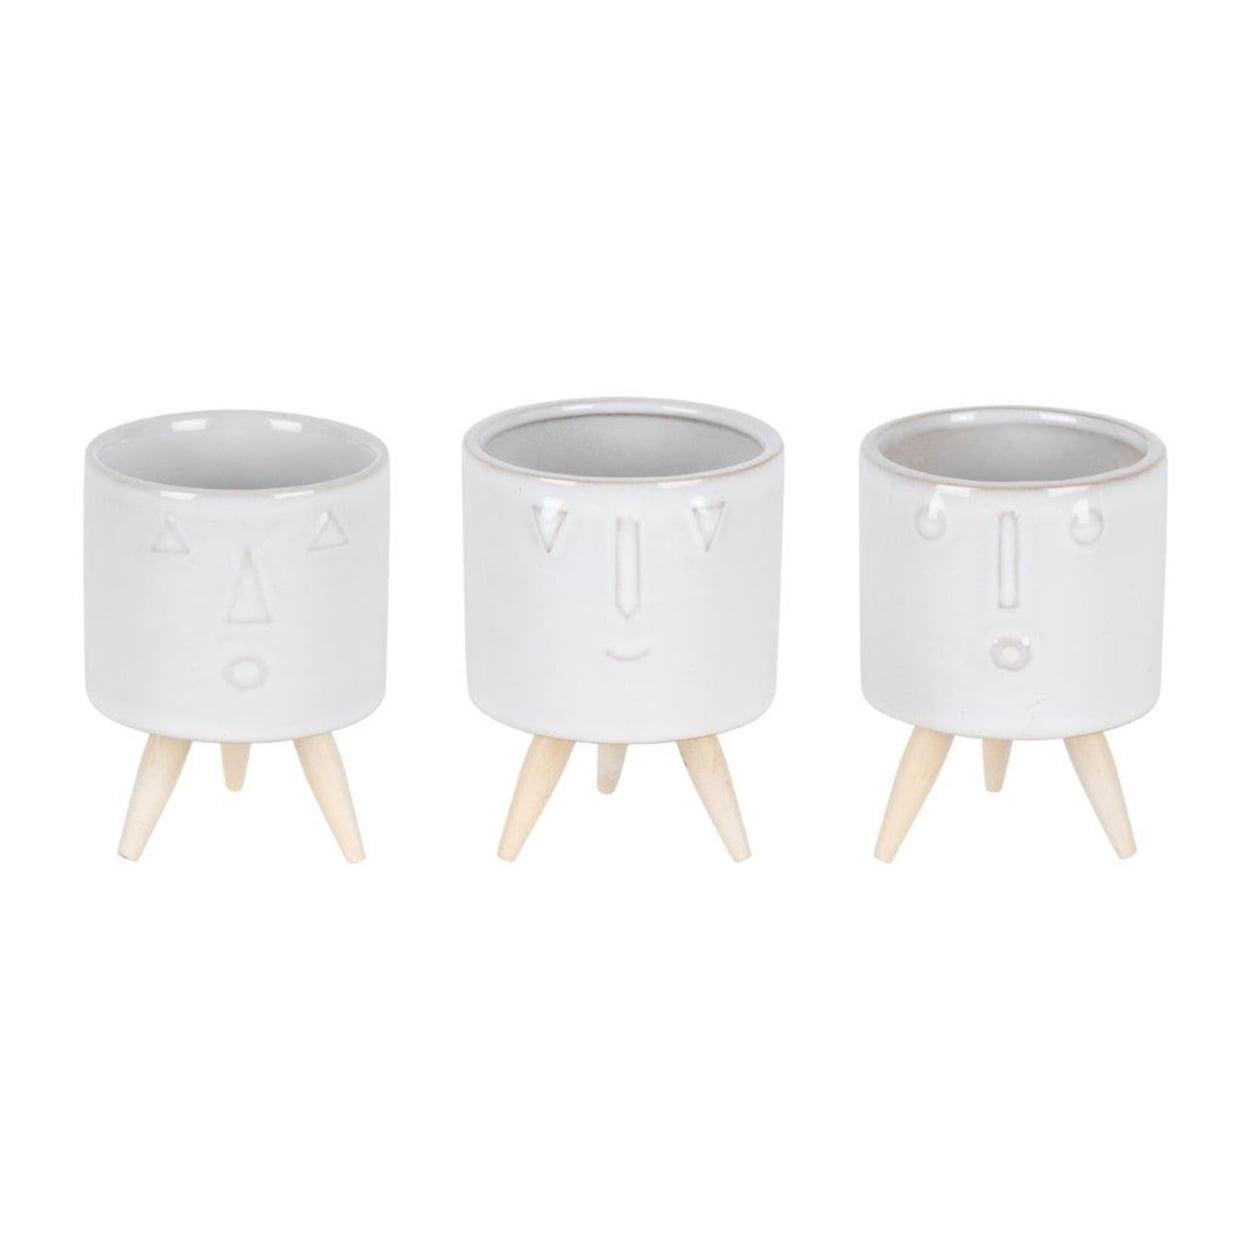 Chic Glazed Porcelain Face Pots Set of 3 with Wooden Accents